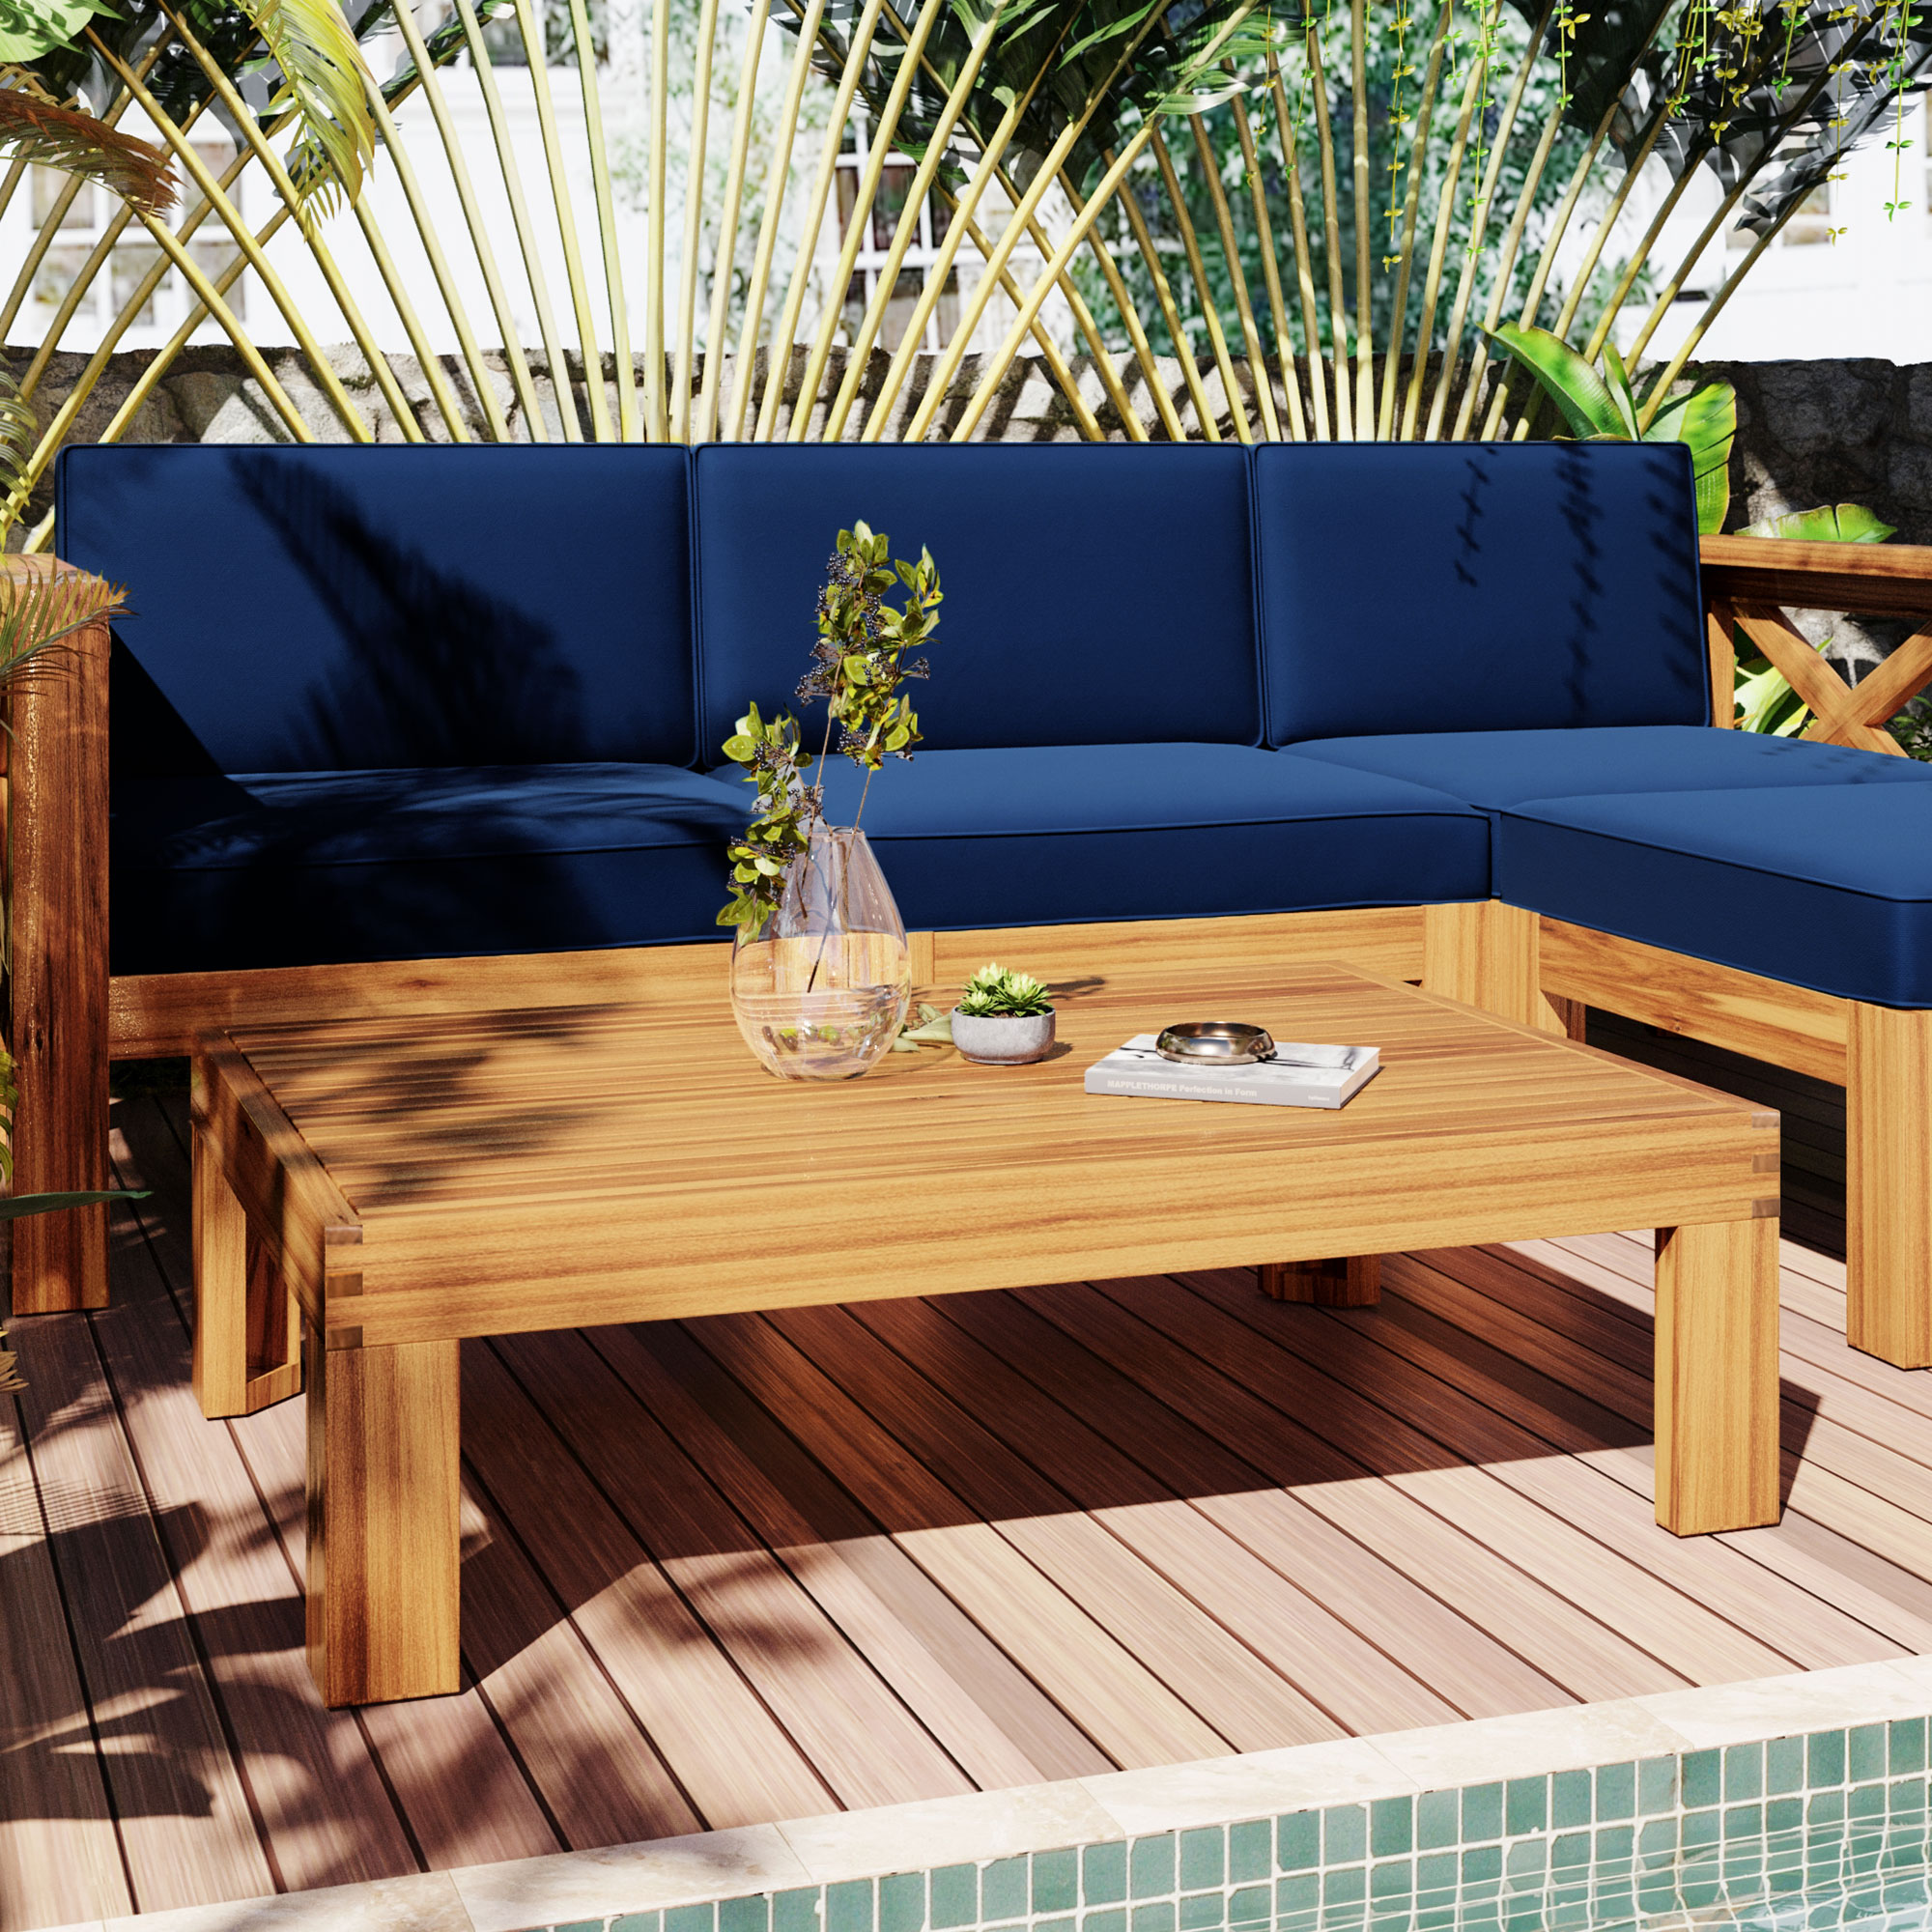 SEGMART 5 PCS Outdoor Acacia Wood Sofa Patio Furniture Set, Cushioned Sectional Sofa Set Chair with Ottoman and Coffee Table for Garden Balcony Poolside Living Room, Blue Cushions - image 2 of 10